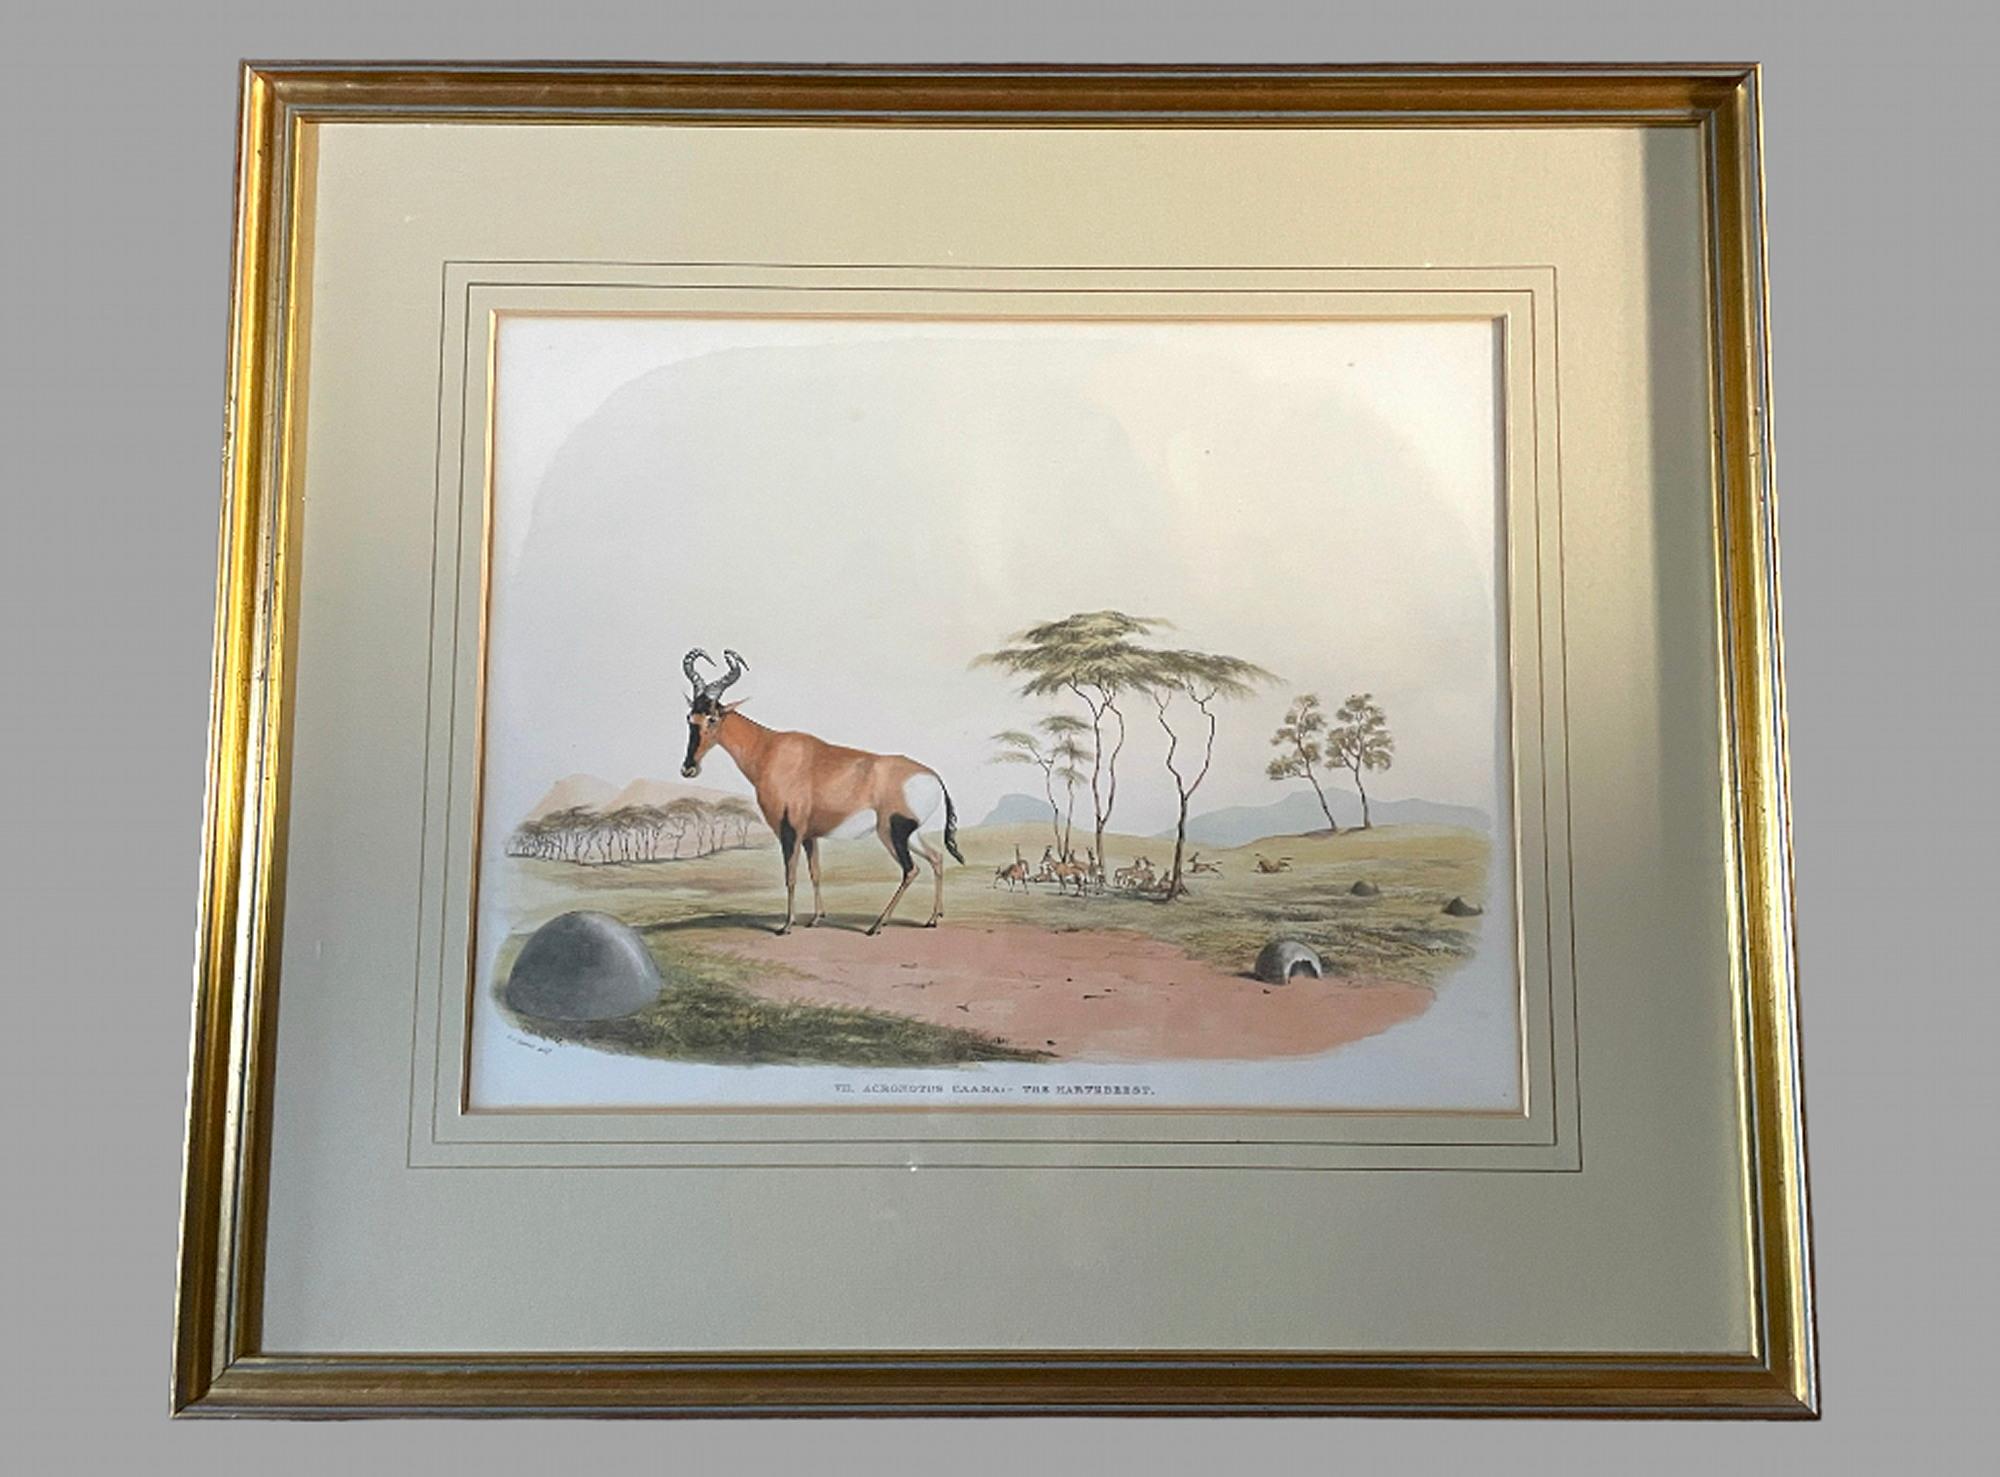 South African Rare Set of 24 Framed Lithographs of Game and Wild Animals